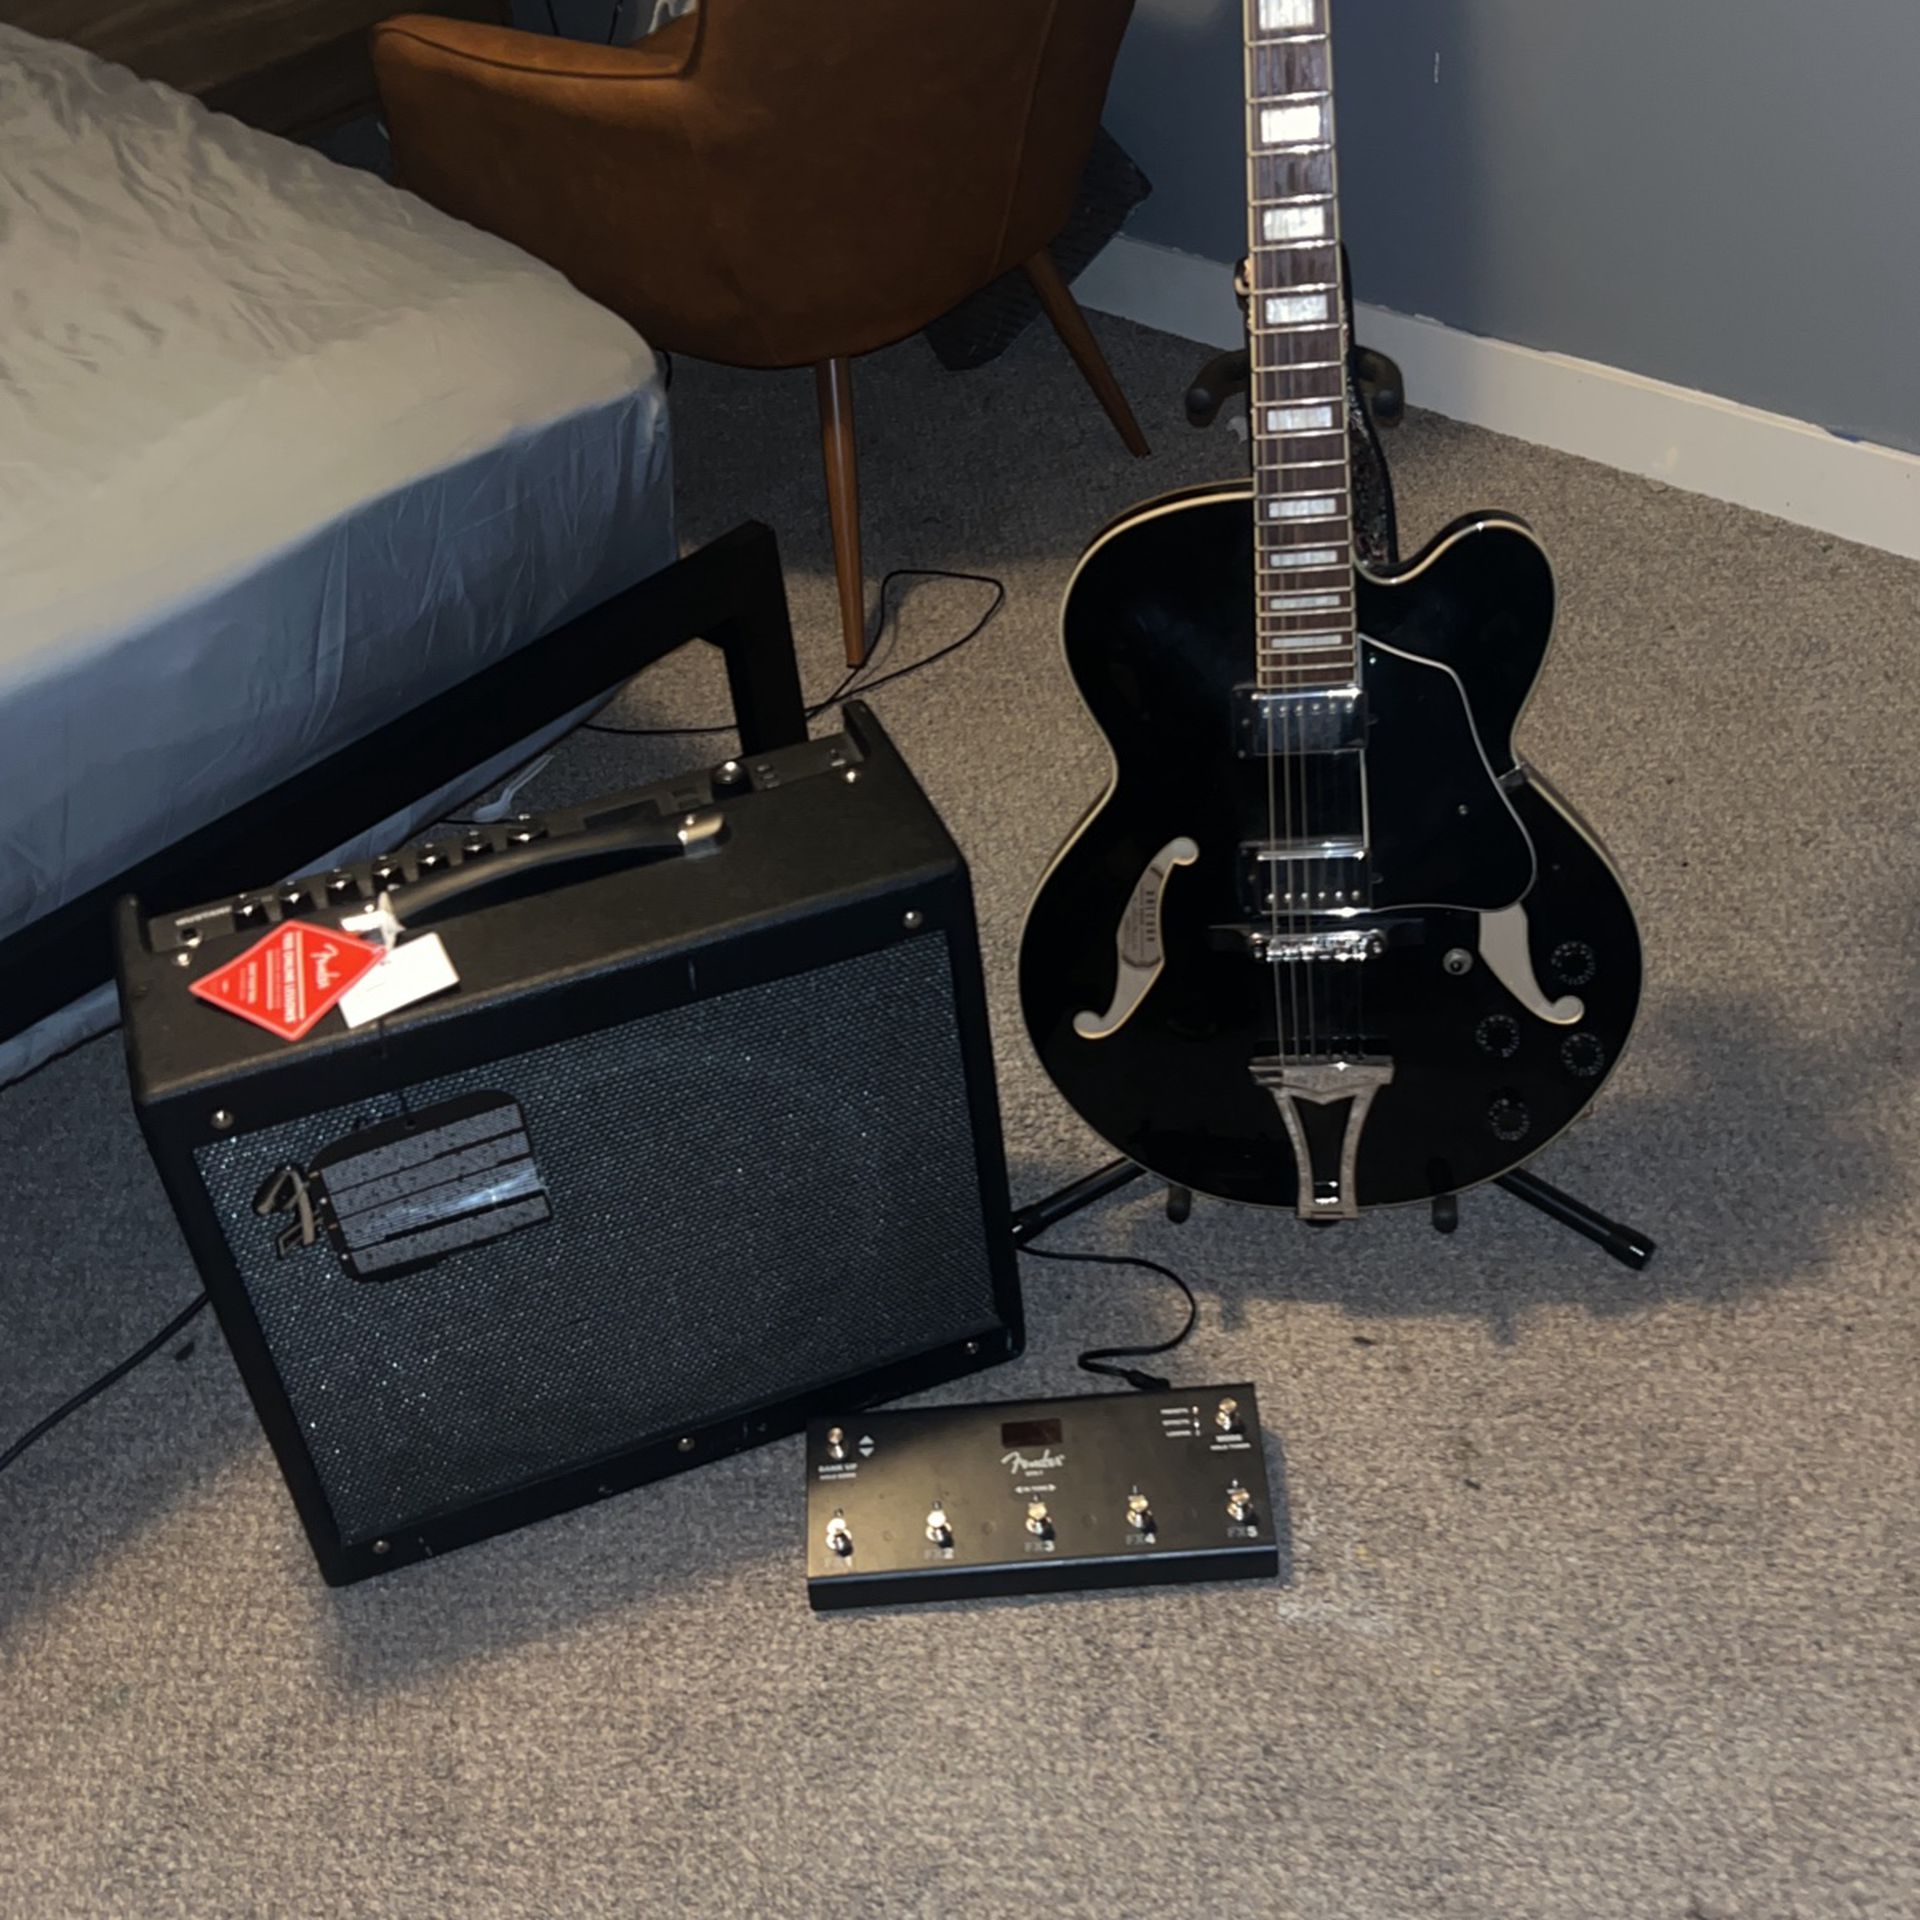 Ibanez Electric Guitar And Fender Mustang Gtx 50 Amp With Gtx-7 Foot Pedals